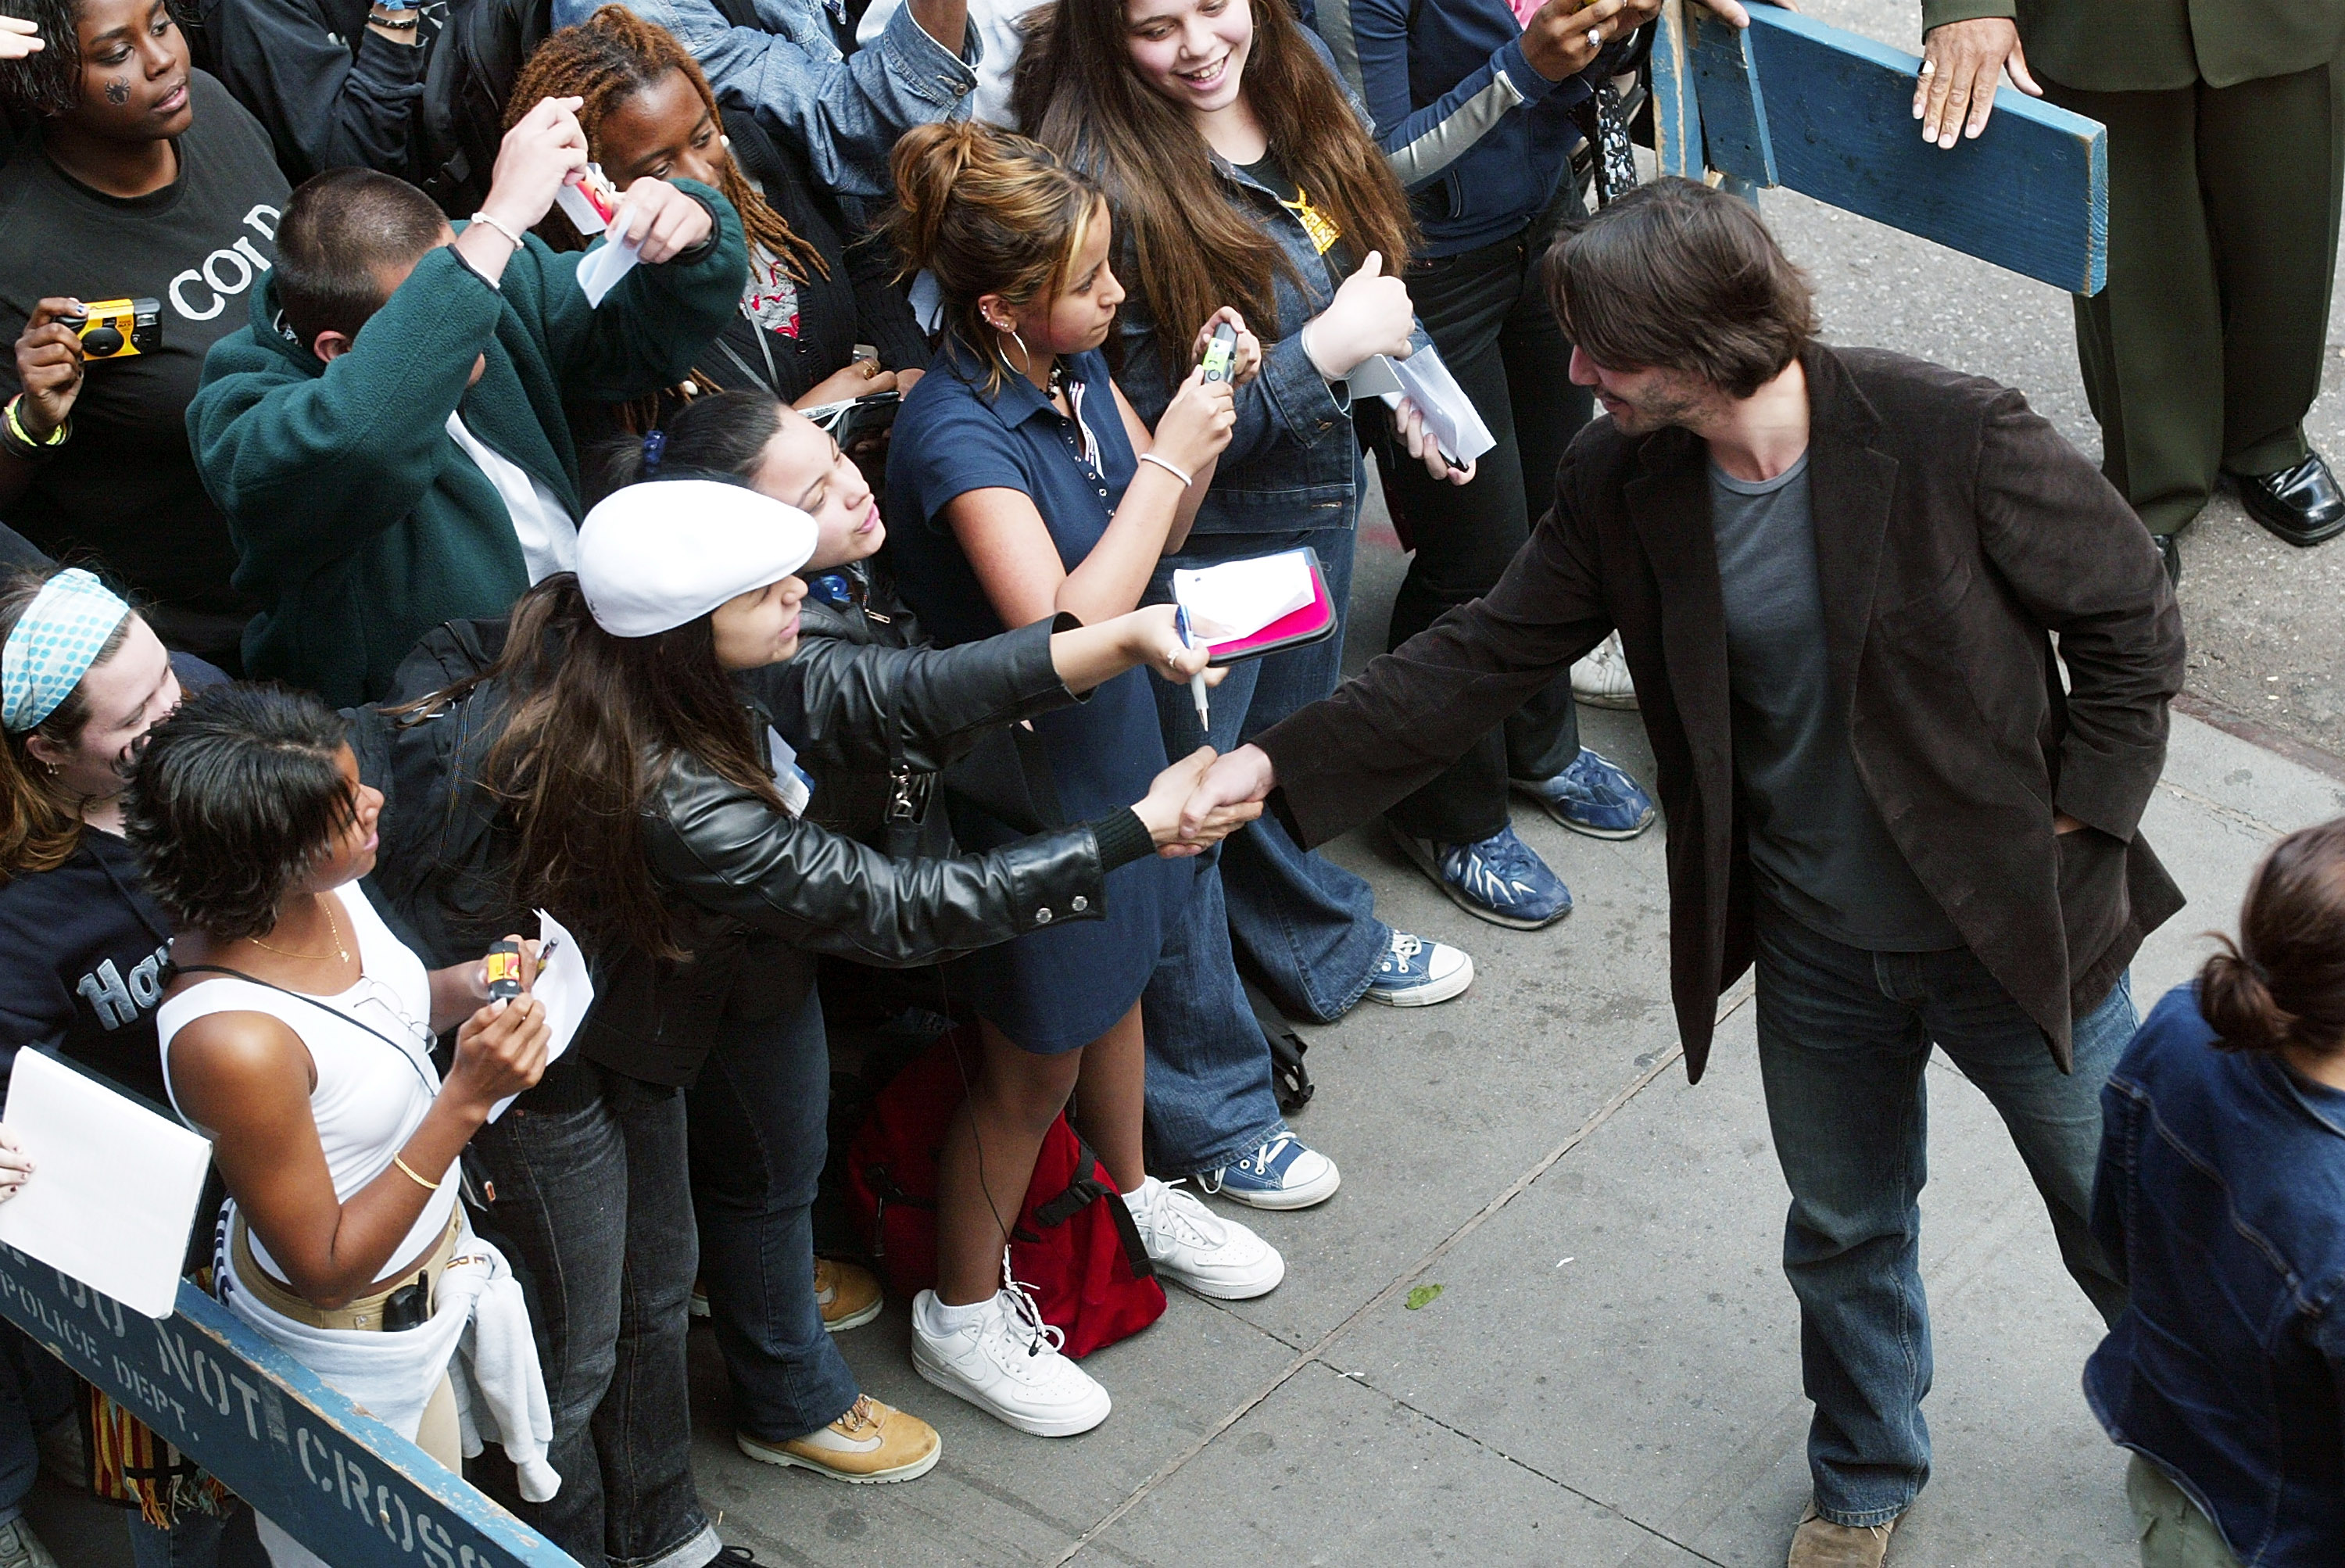 Keanu Reeves greets fans during a visit from the cast of "The Matrix Reloaded" at the MTV Times Square studios in New York City, on May 13, 2003. | Source: Getty Images